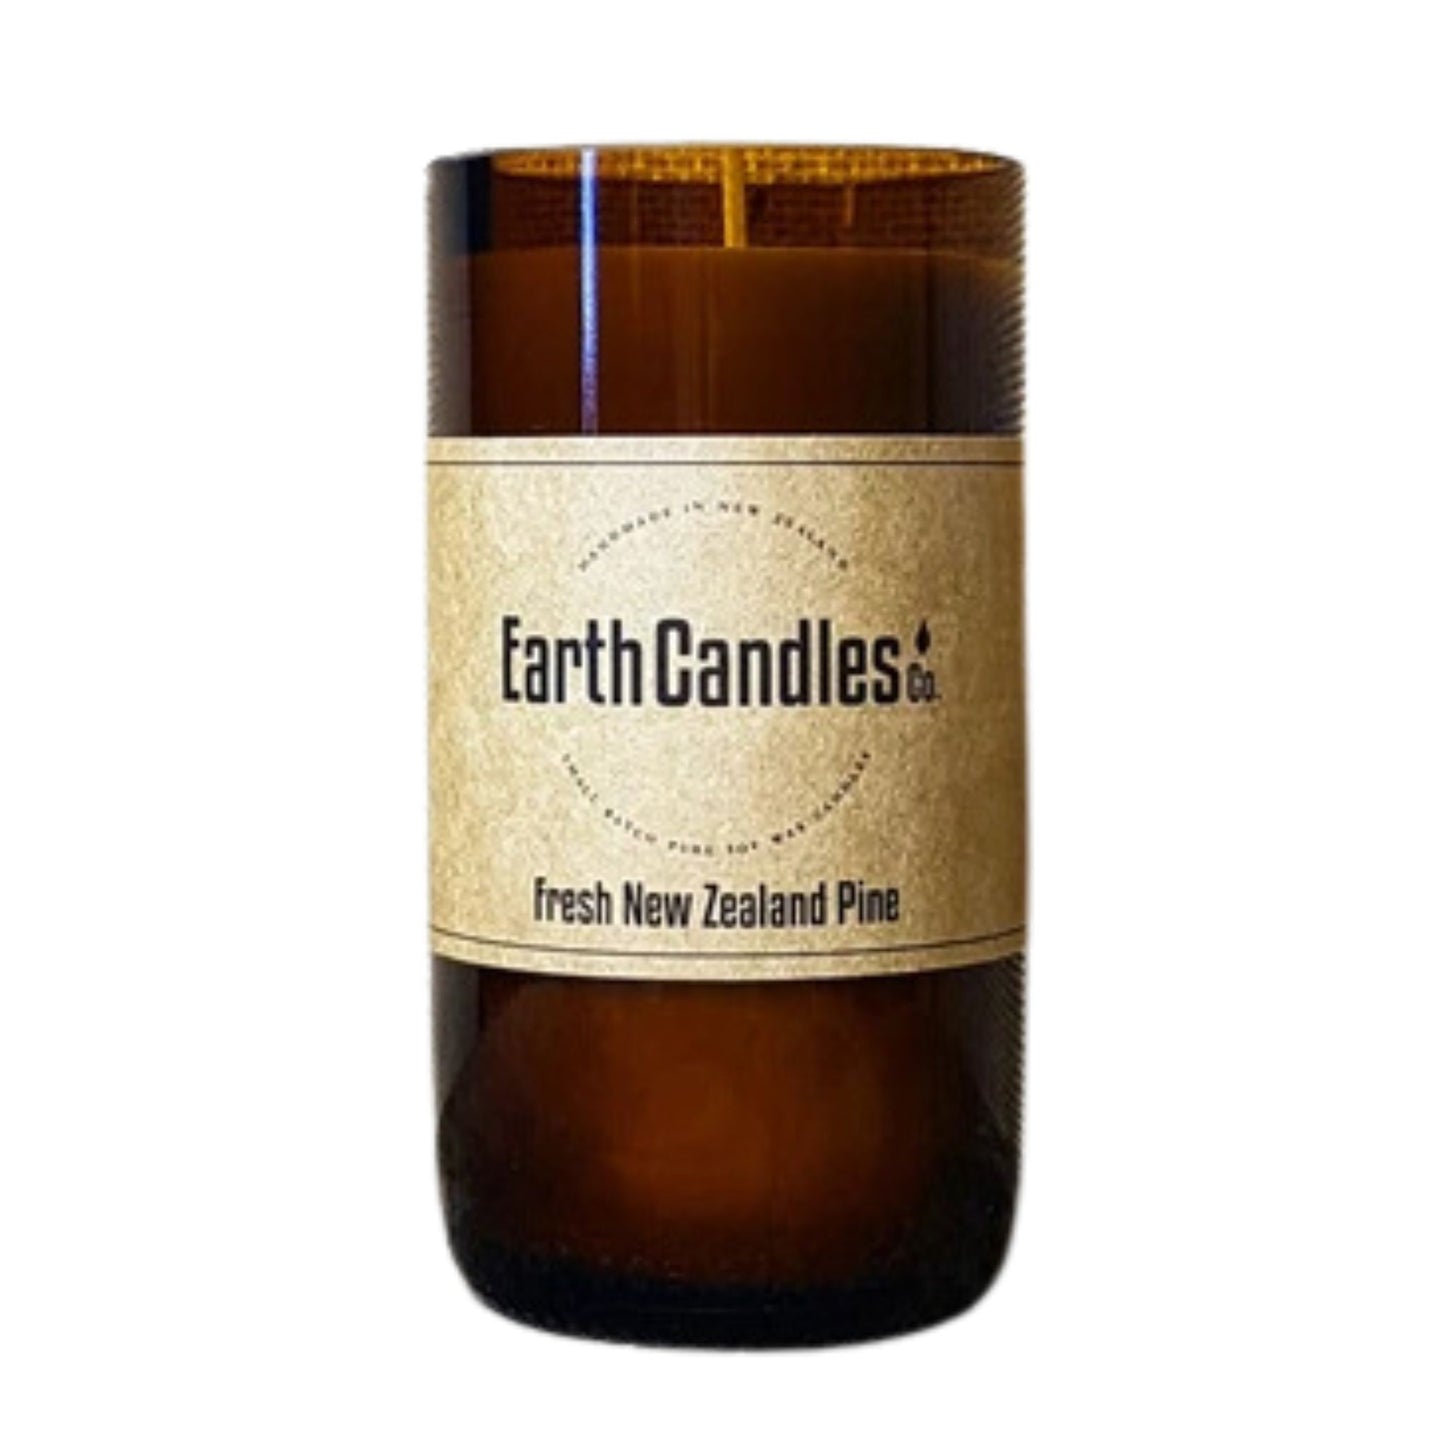 Fresh New Zealand Pine Soy candle. Proudly made in New Zealand by Earth Candles. 200 gram candle in re purposed brown glass bottle.